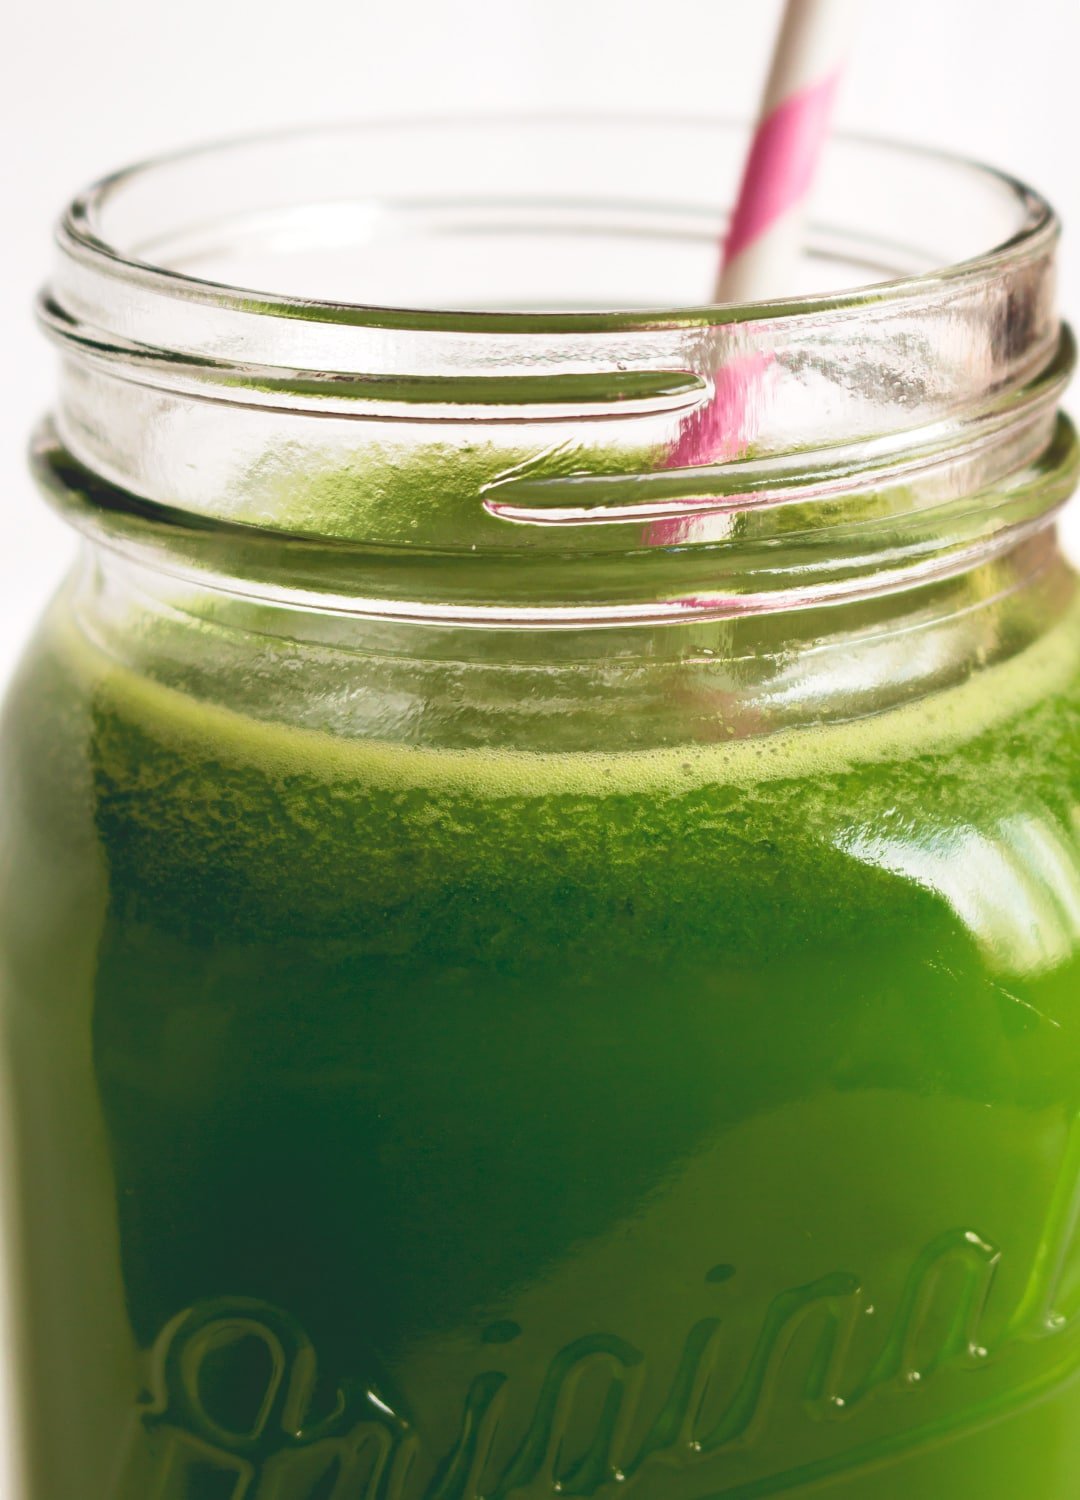 Green Juice with Ginger - delicious alkalizing green juice with ginger and lemon. Full of amazing vitamins and minerals your body craves! One green juice a day keeps the doctor away. I love this recipe! | thehealthfulideas.com